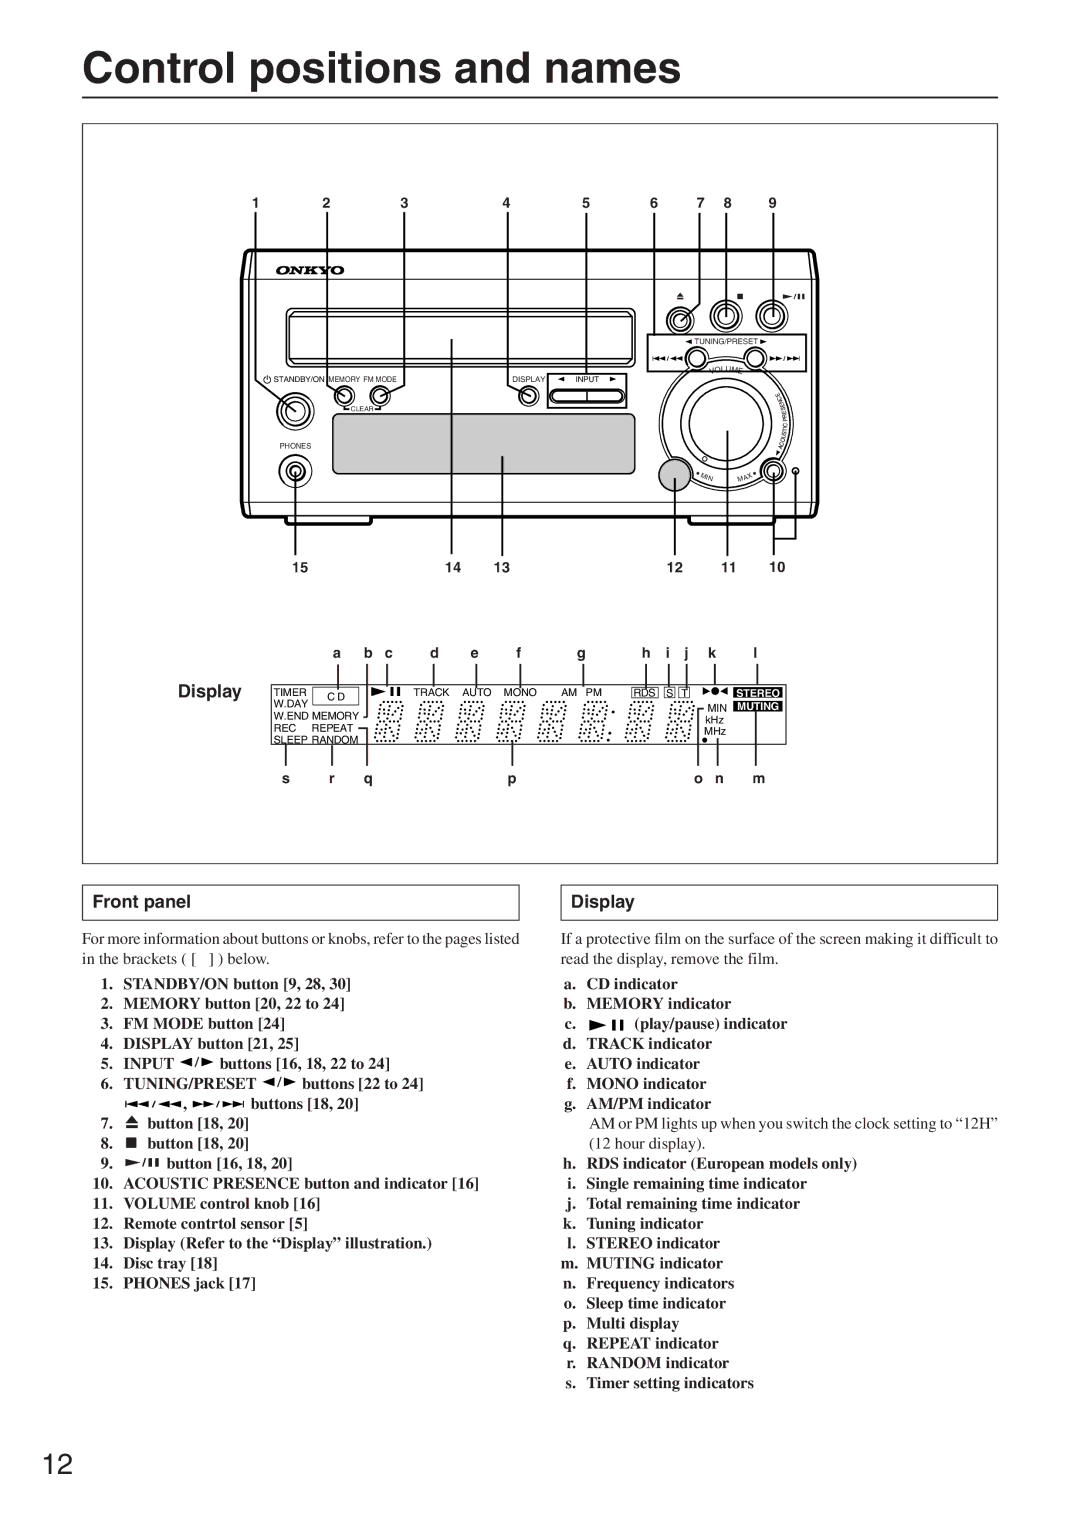 Onkyo CR-305FX instruction manual Control positions and names, Display, Front panel 